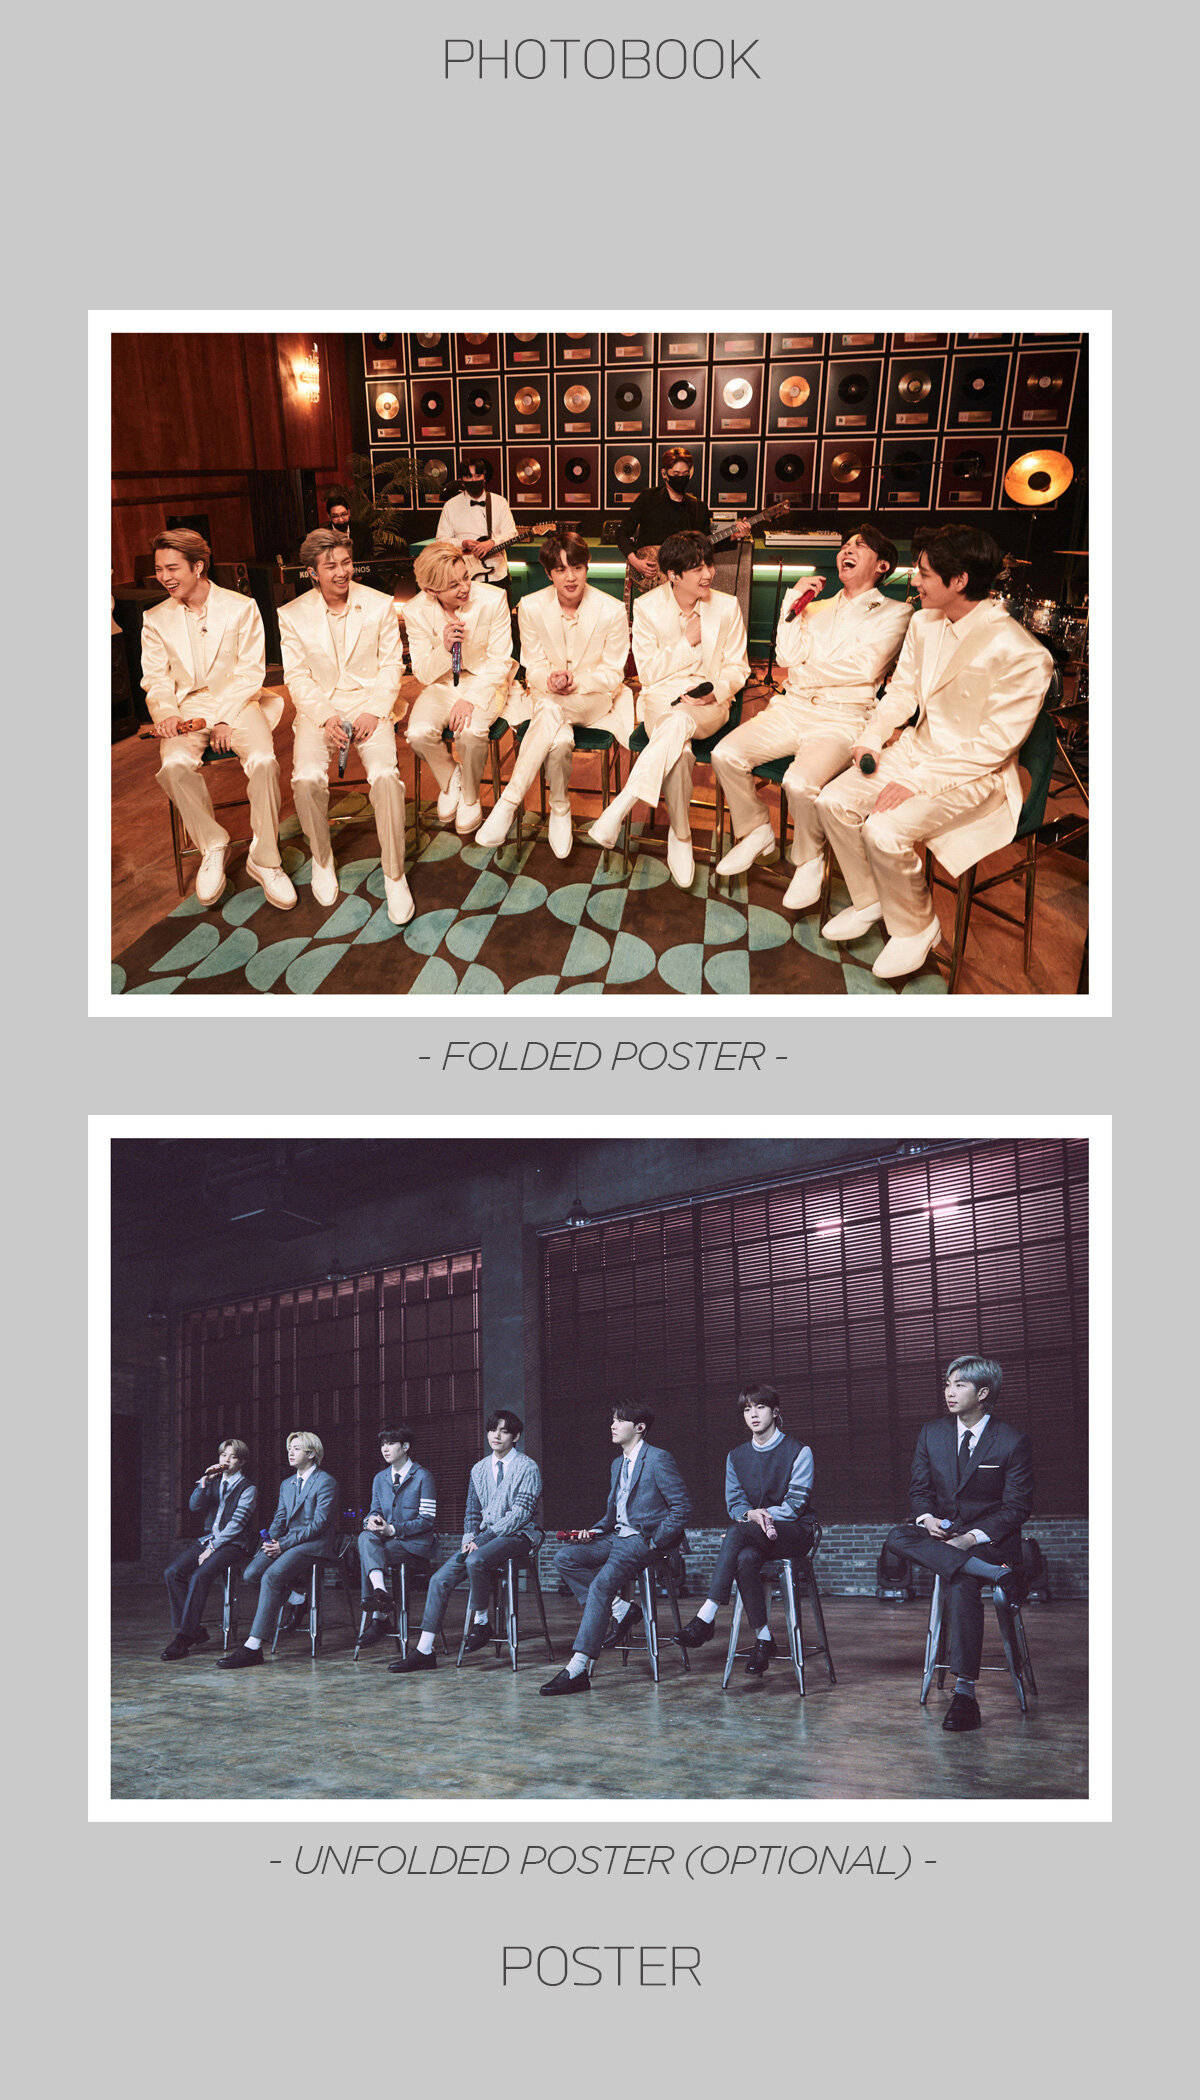 The Fact BTS Photobook Special Edition - Print Photo and Special Optional Poster